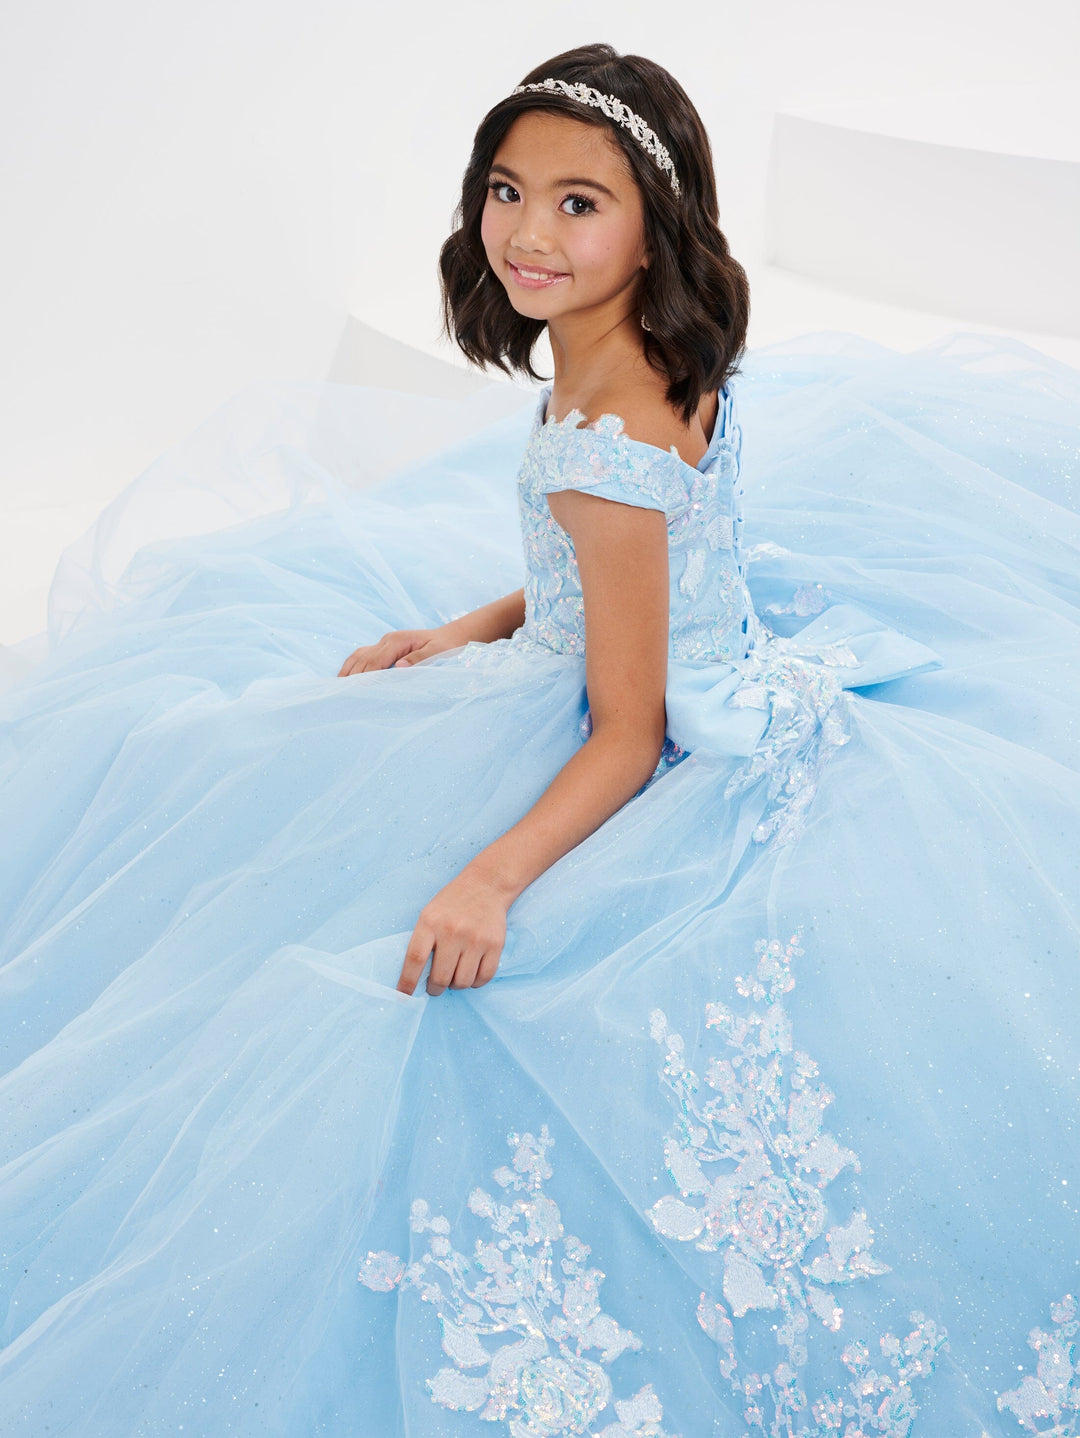 Girls Sequin Applique Gown by Tiffany Princess 13706